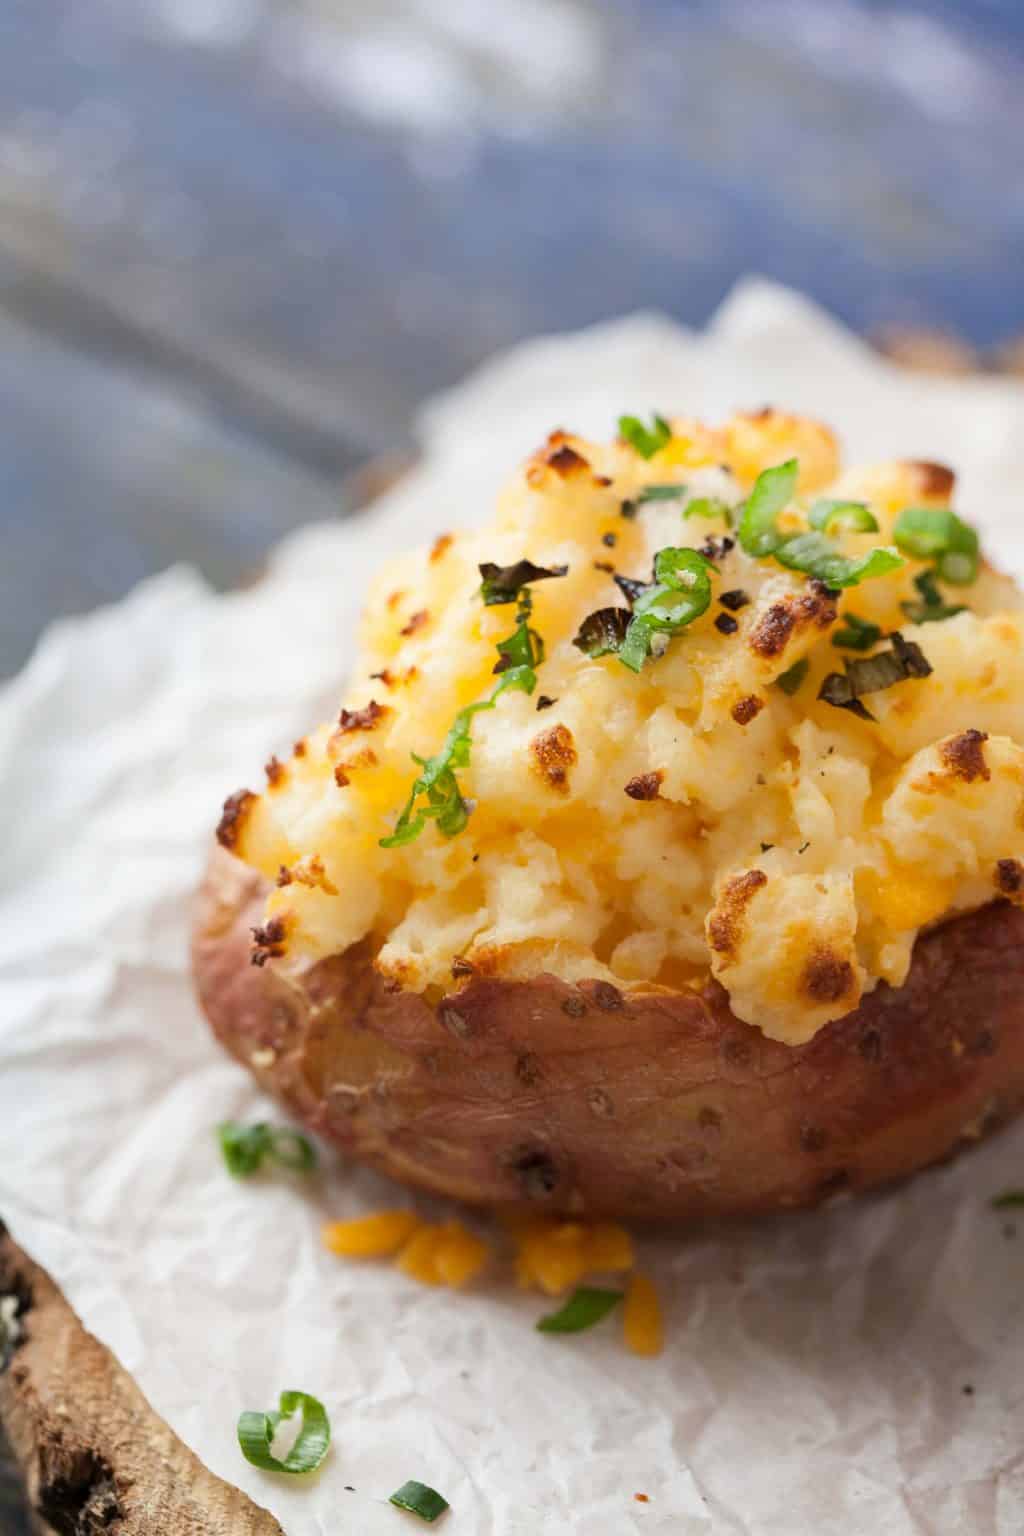 Piled high with cheesy filling, overstuffed loaded potatoes take a microwave shortcut and are ready in just 30 minutes.